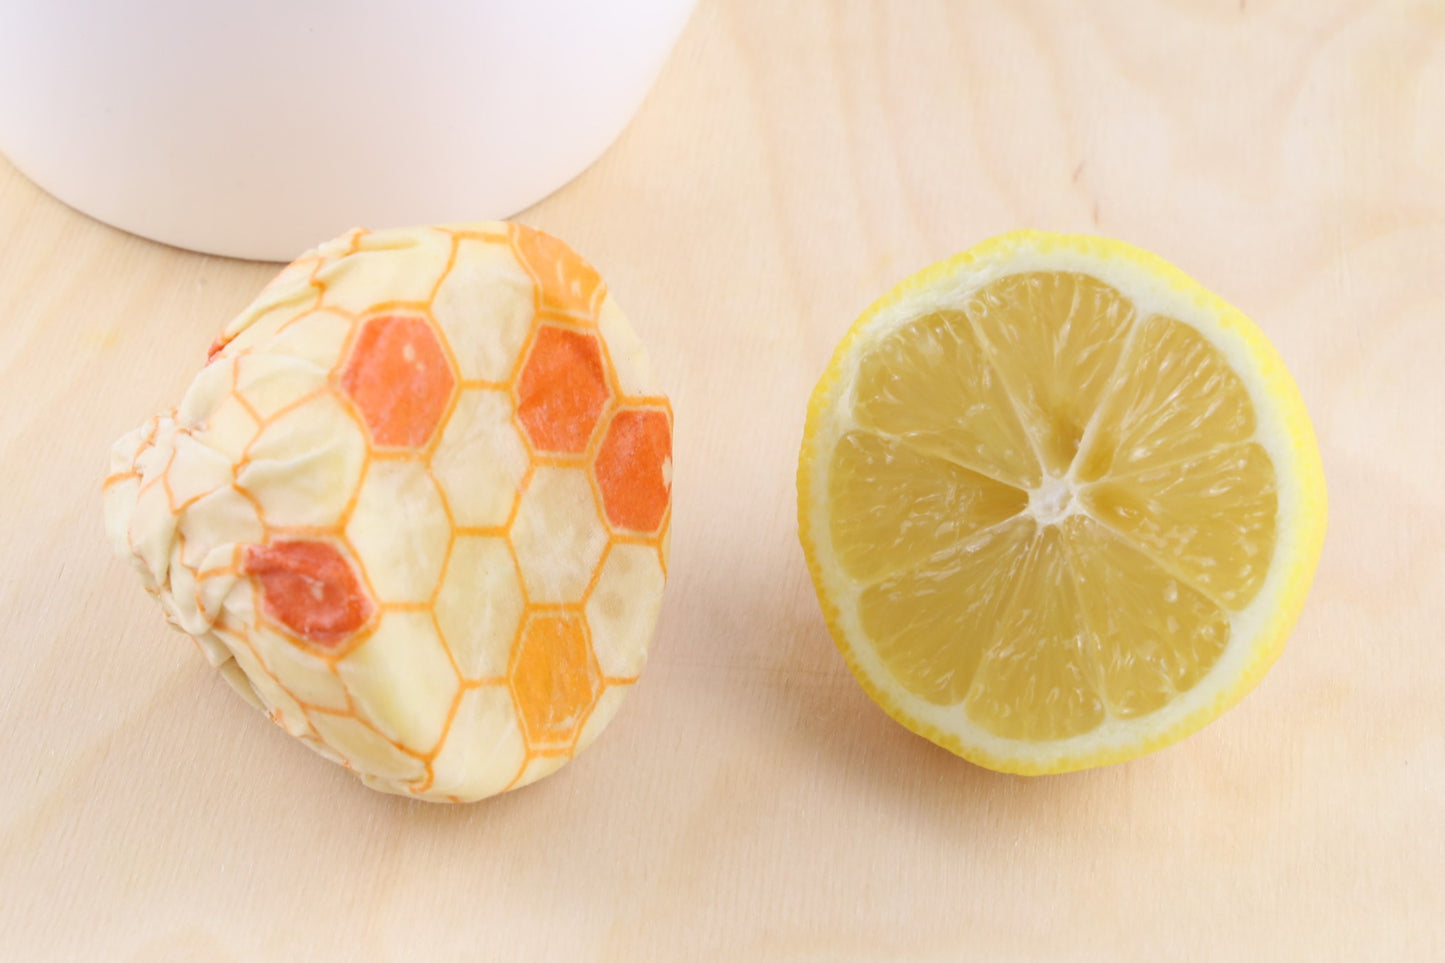 beeswax food wrap hive pattern from beewise amsterdam being used to wrap half lemon at the table